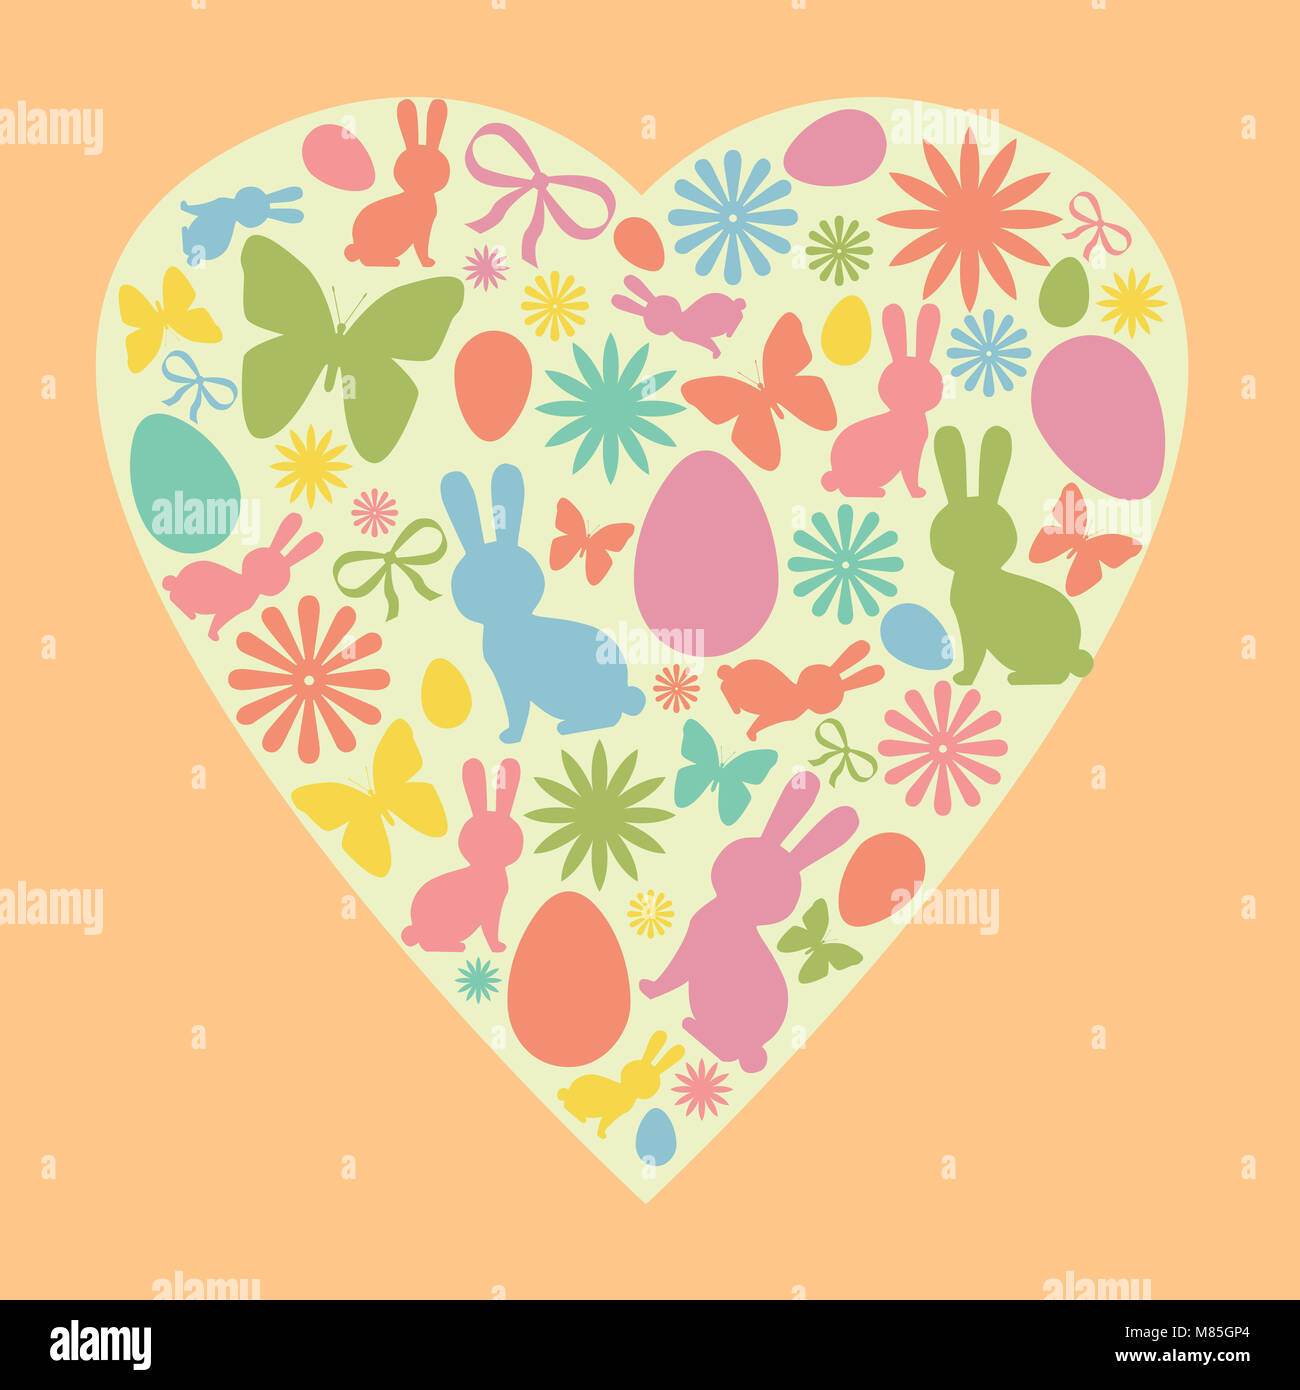 Easter Characters Grouped in A Heart. Easter design in Pastel Colors. Stock Photo